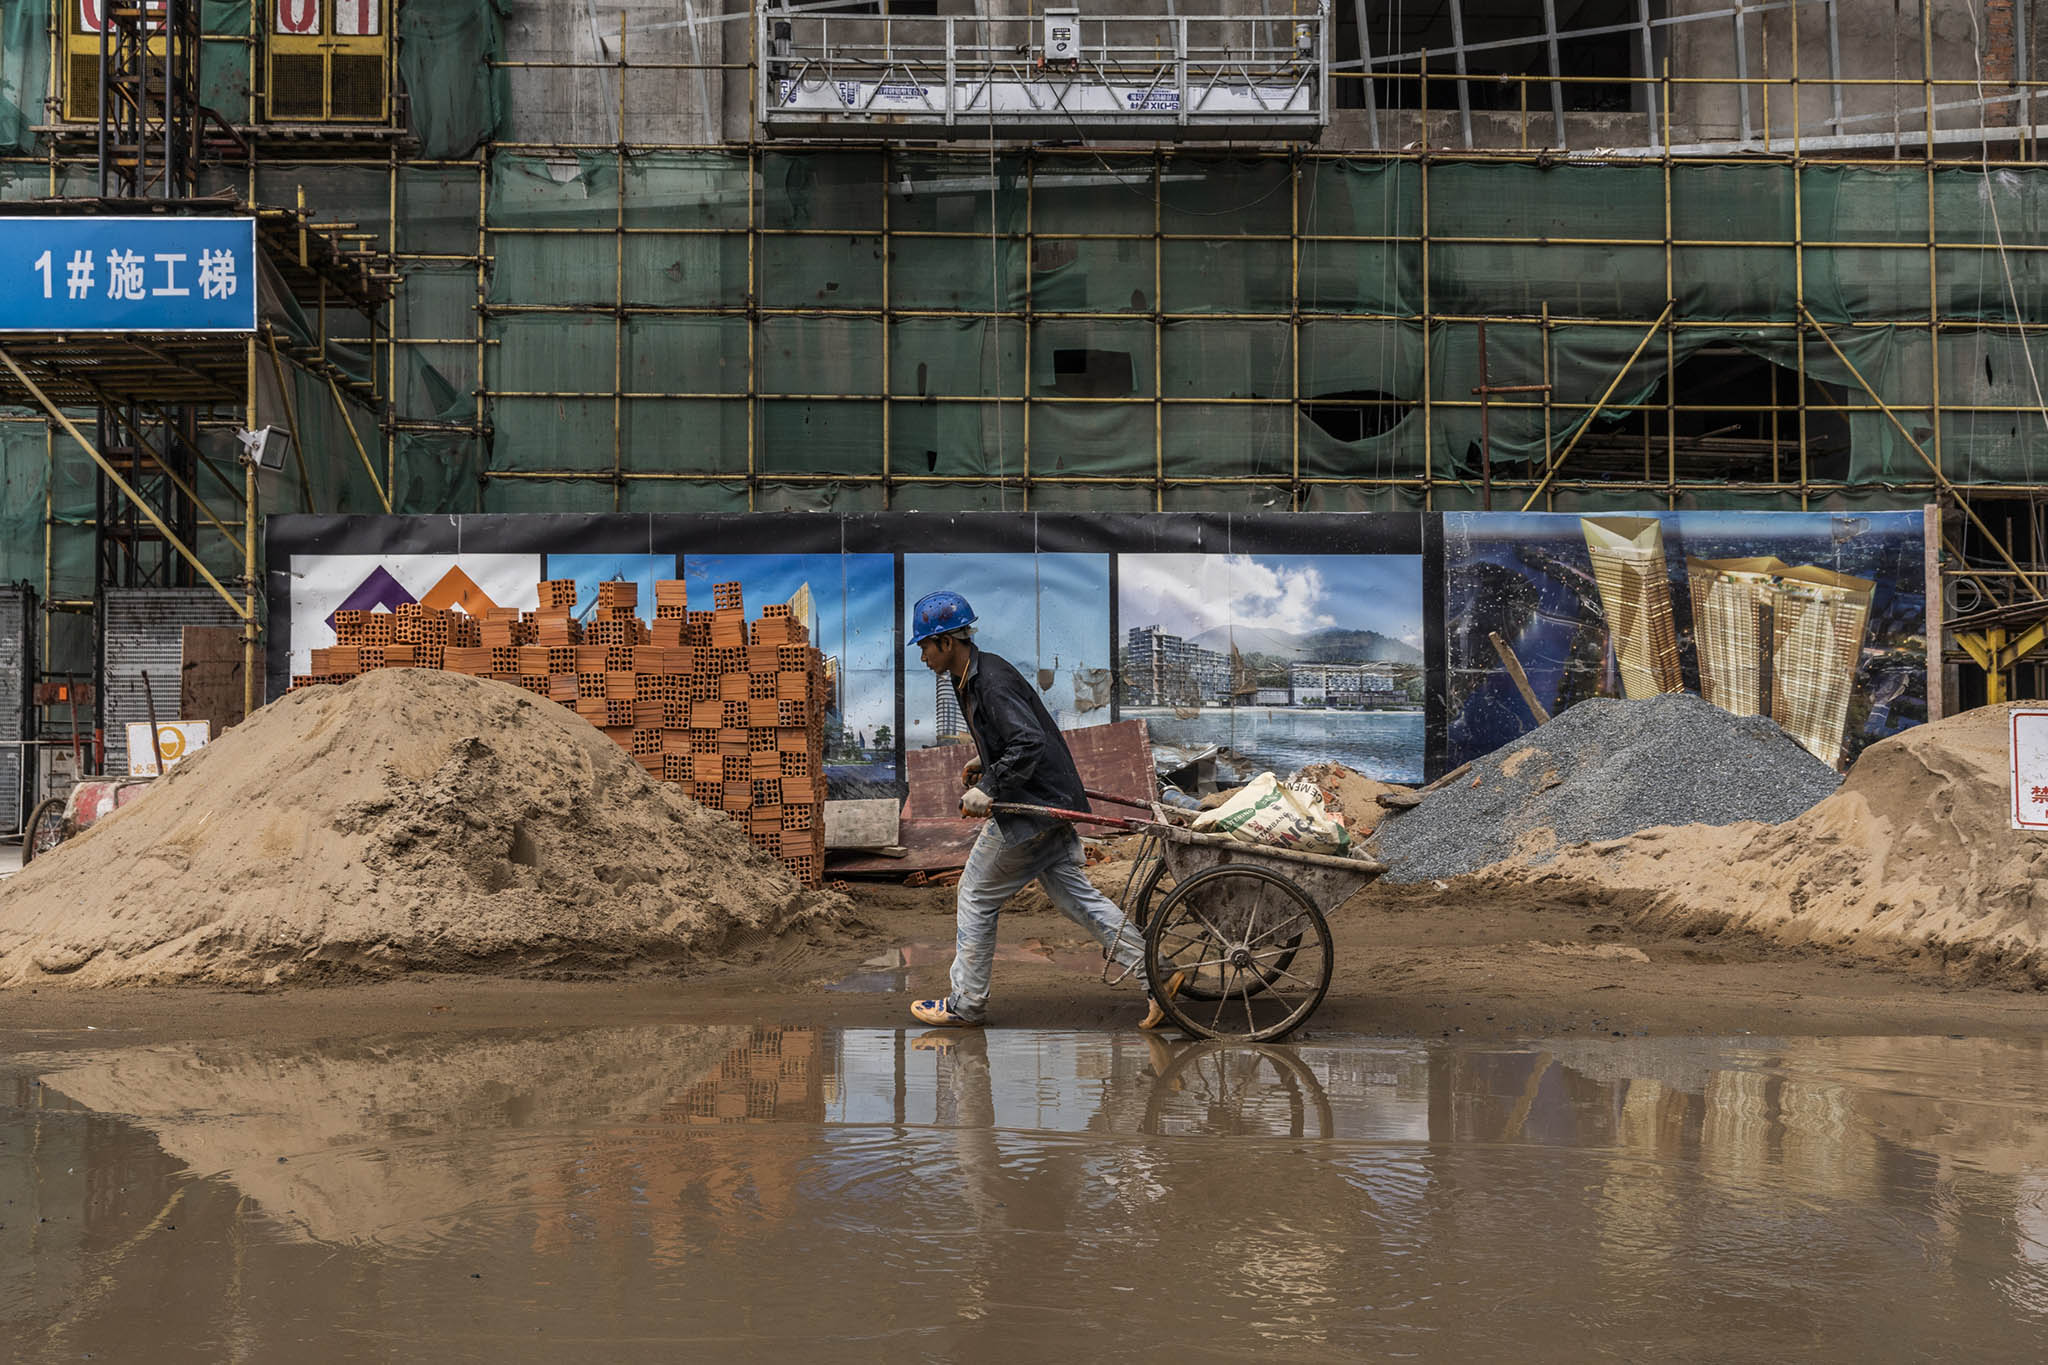 A construction project financed by China, which is Cambodia’s largest trading partner, in Phnom Penh, Aug. 10, 2019. (Adam Dean/The New York Times)